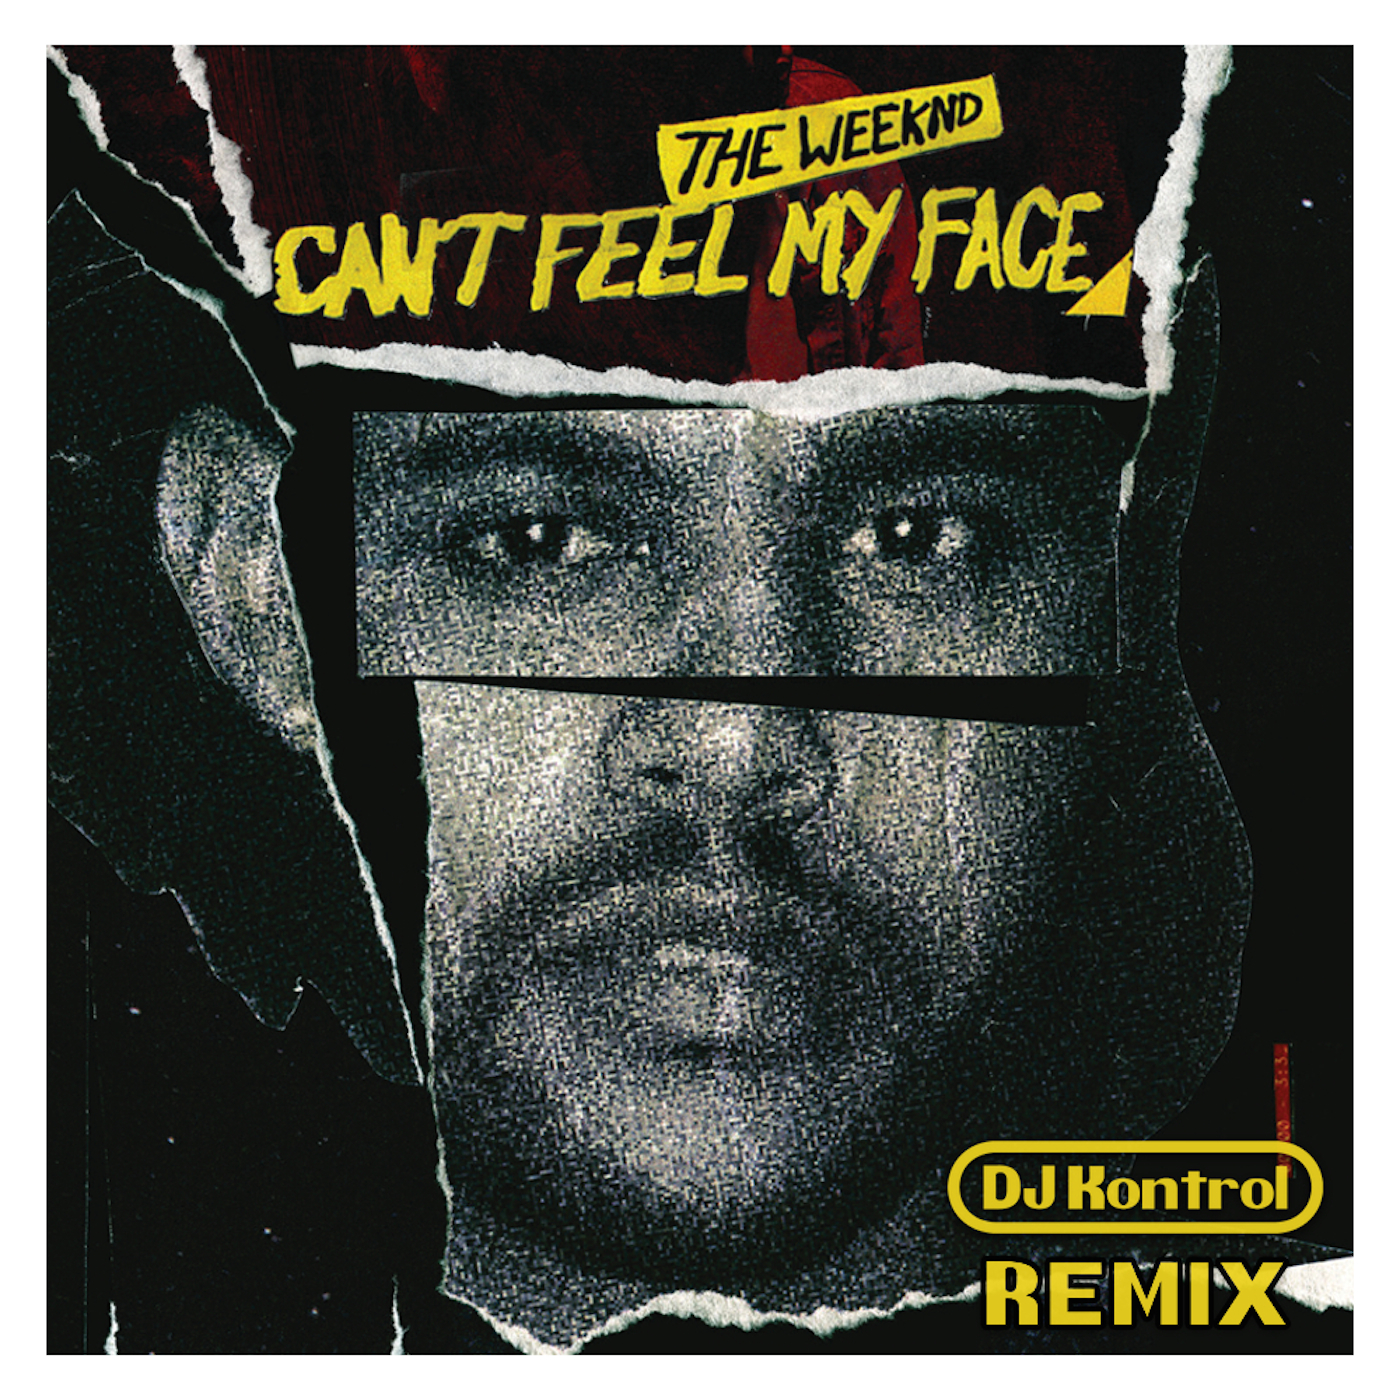 The Weeknd - Can't Feel My Face (DJ Kontrol Remix)